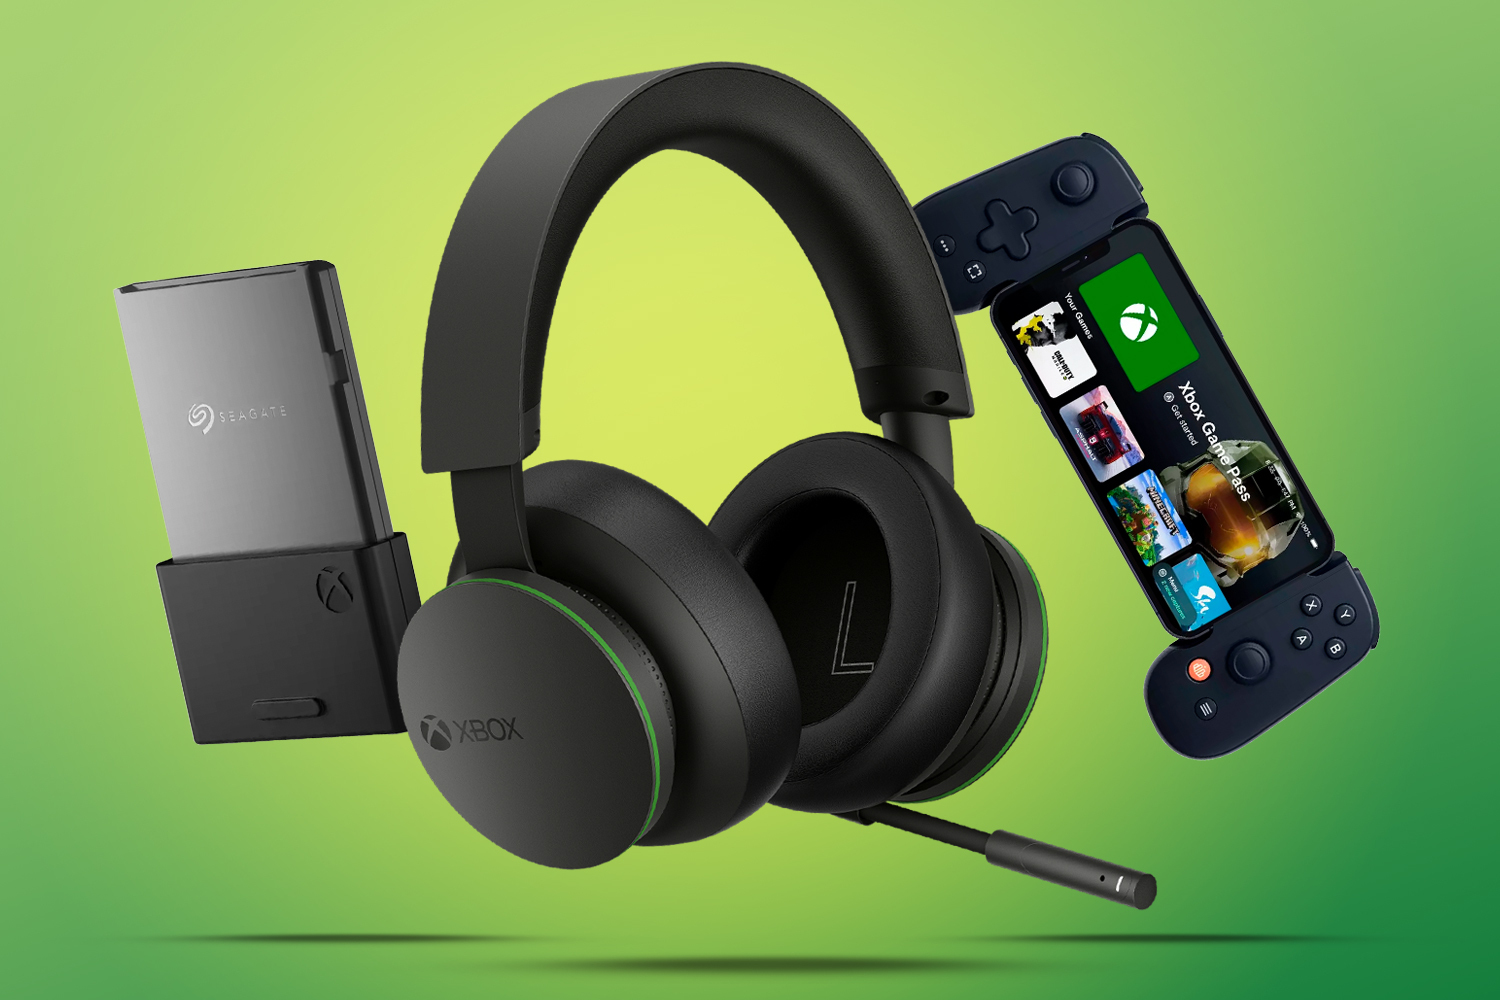 The best smartphones and gaming accessories for Xbox Cloud Gaming